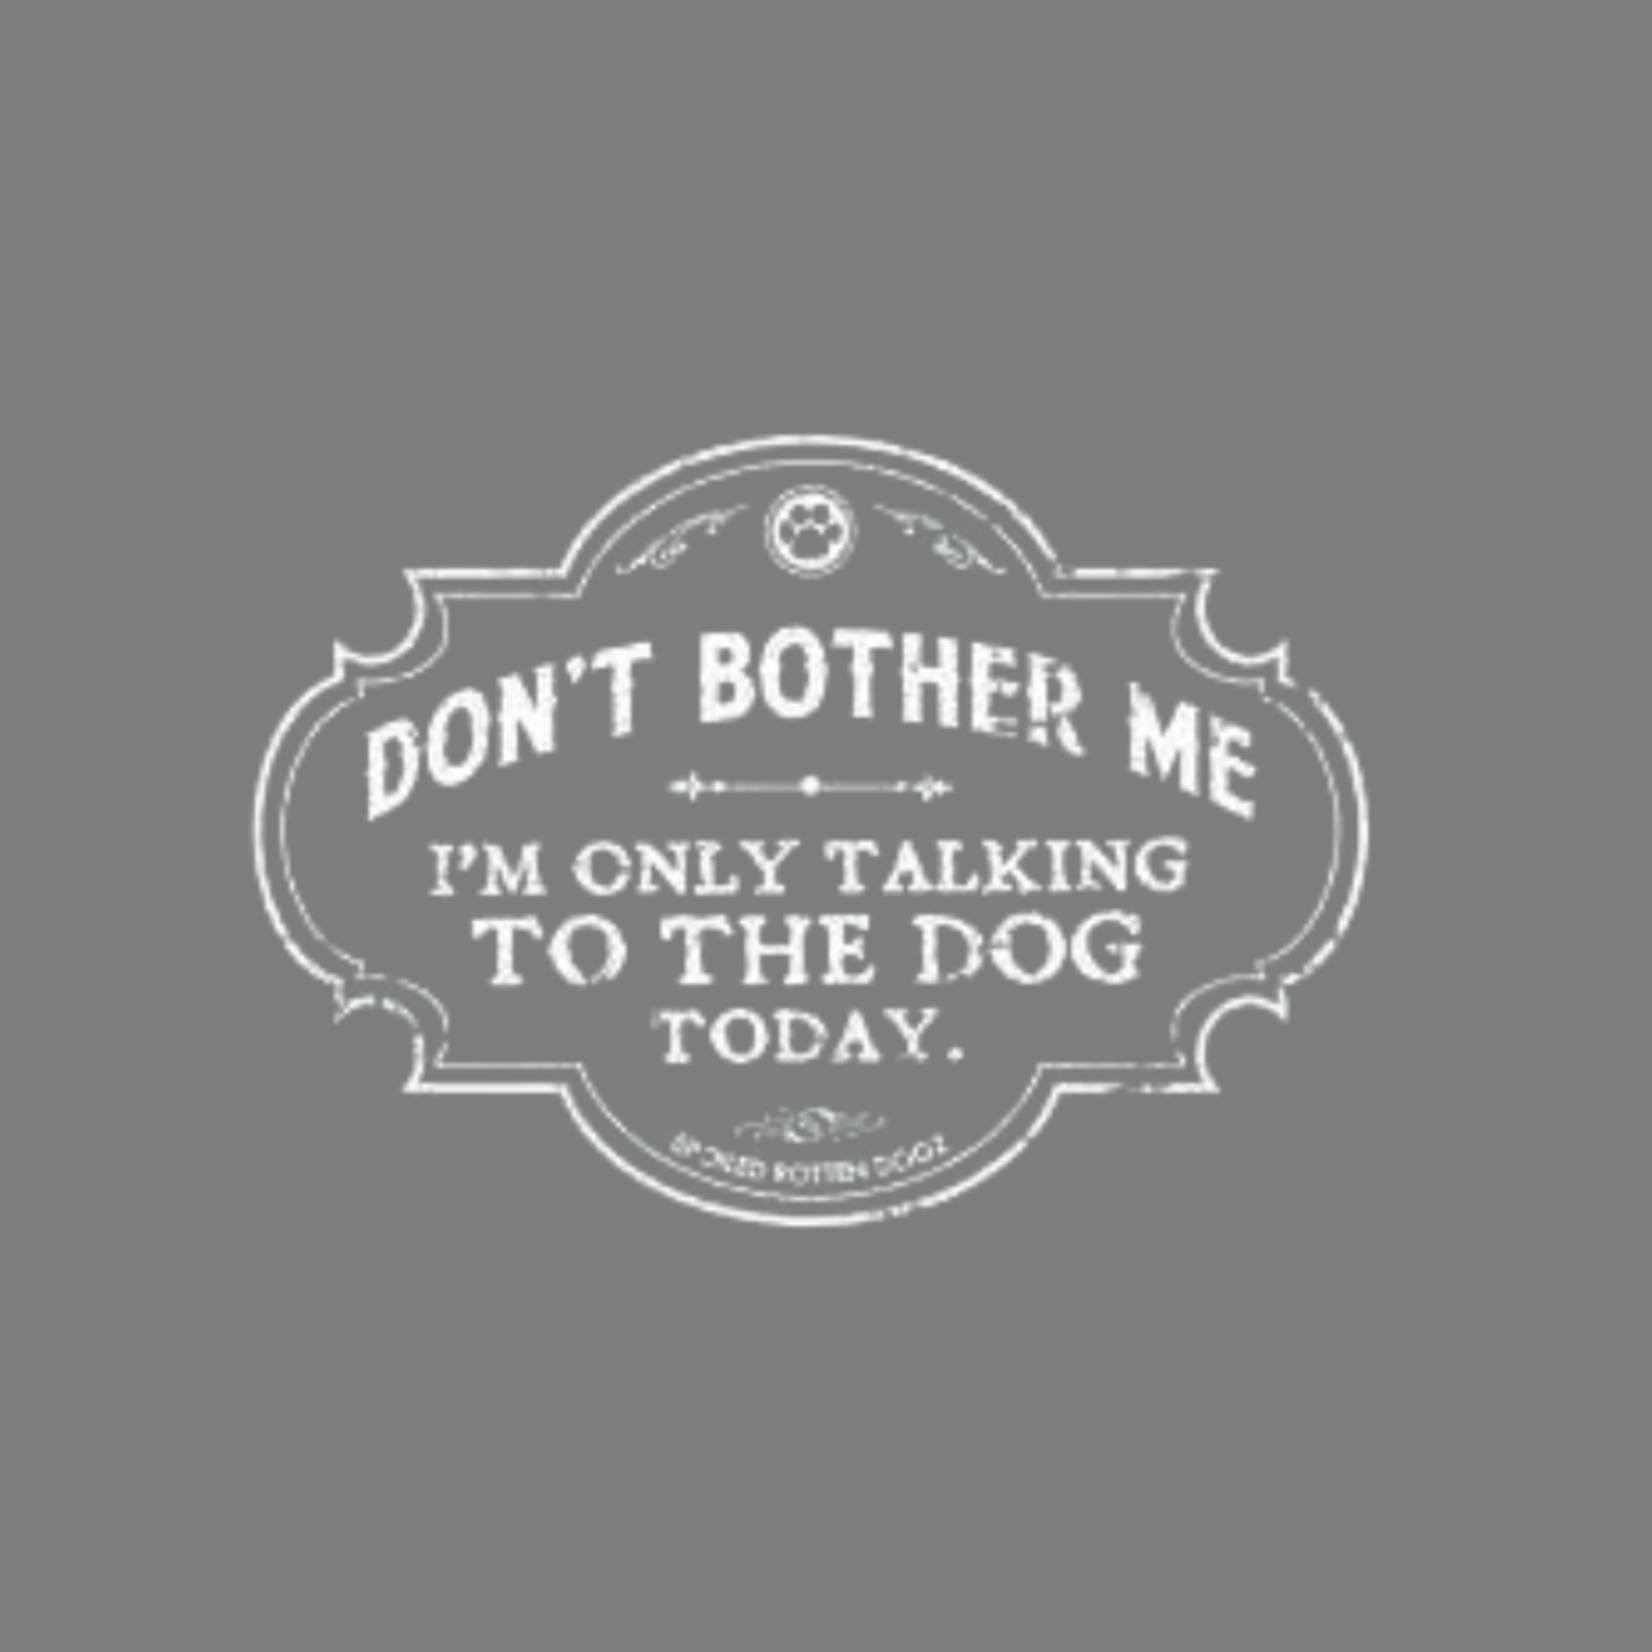 Spoiled Rotten Dogz Don’t Bother Me… Only Talking to the Dog Today - T-Shirt - Spoiled Rotten Dogz